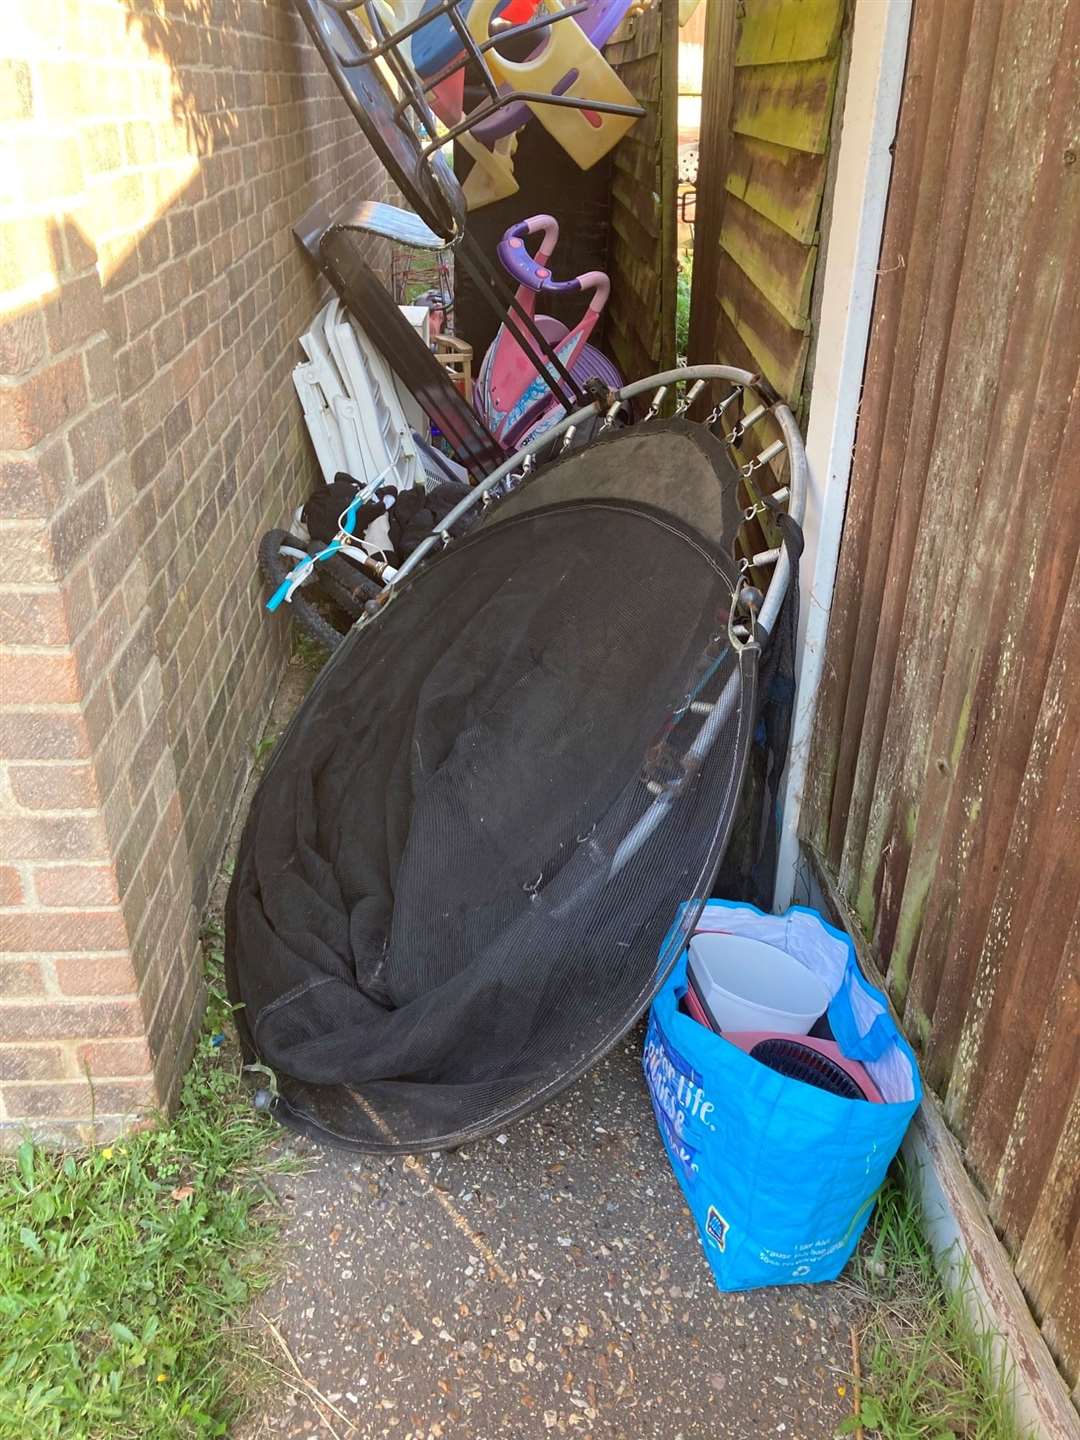 Children's toys were among the items dumped in an alleyway on Westfield